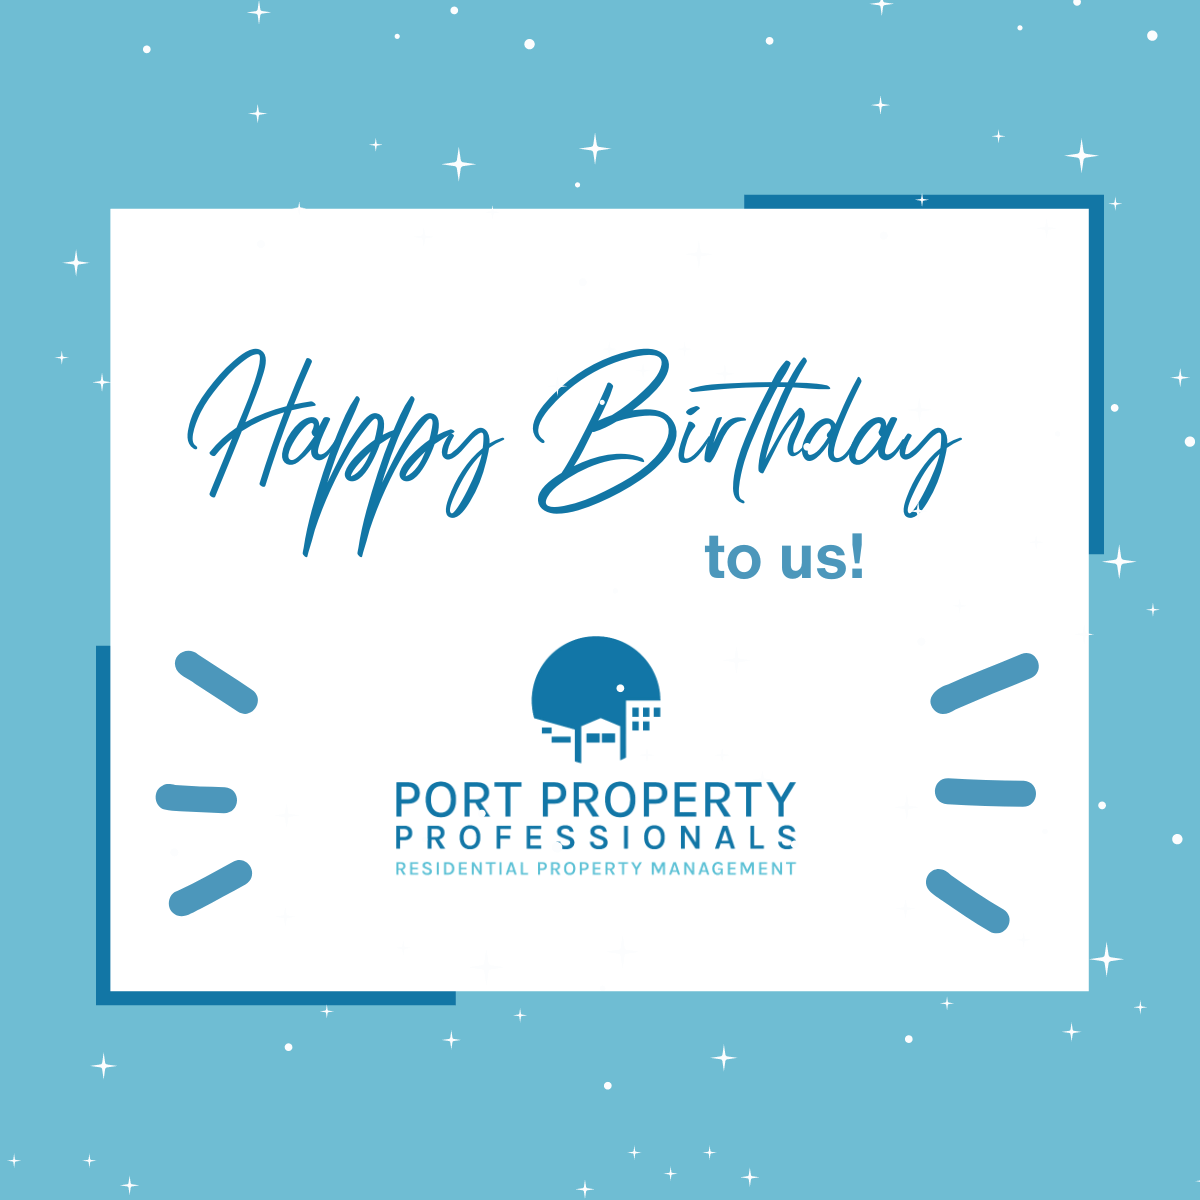 Celebrating Four Remarkable Years at Port Property Professionals: A Journey of Growth and Gratitude image